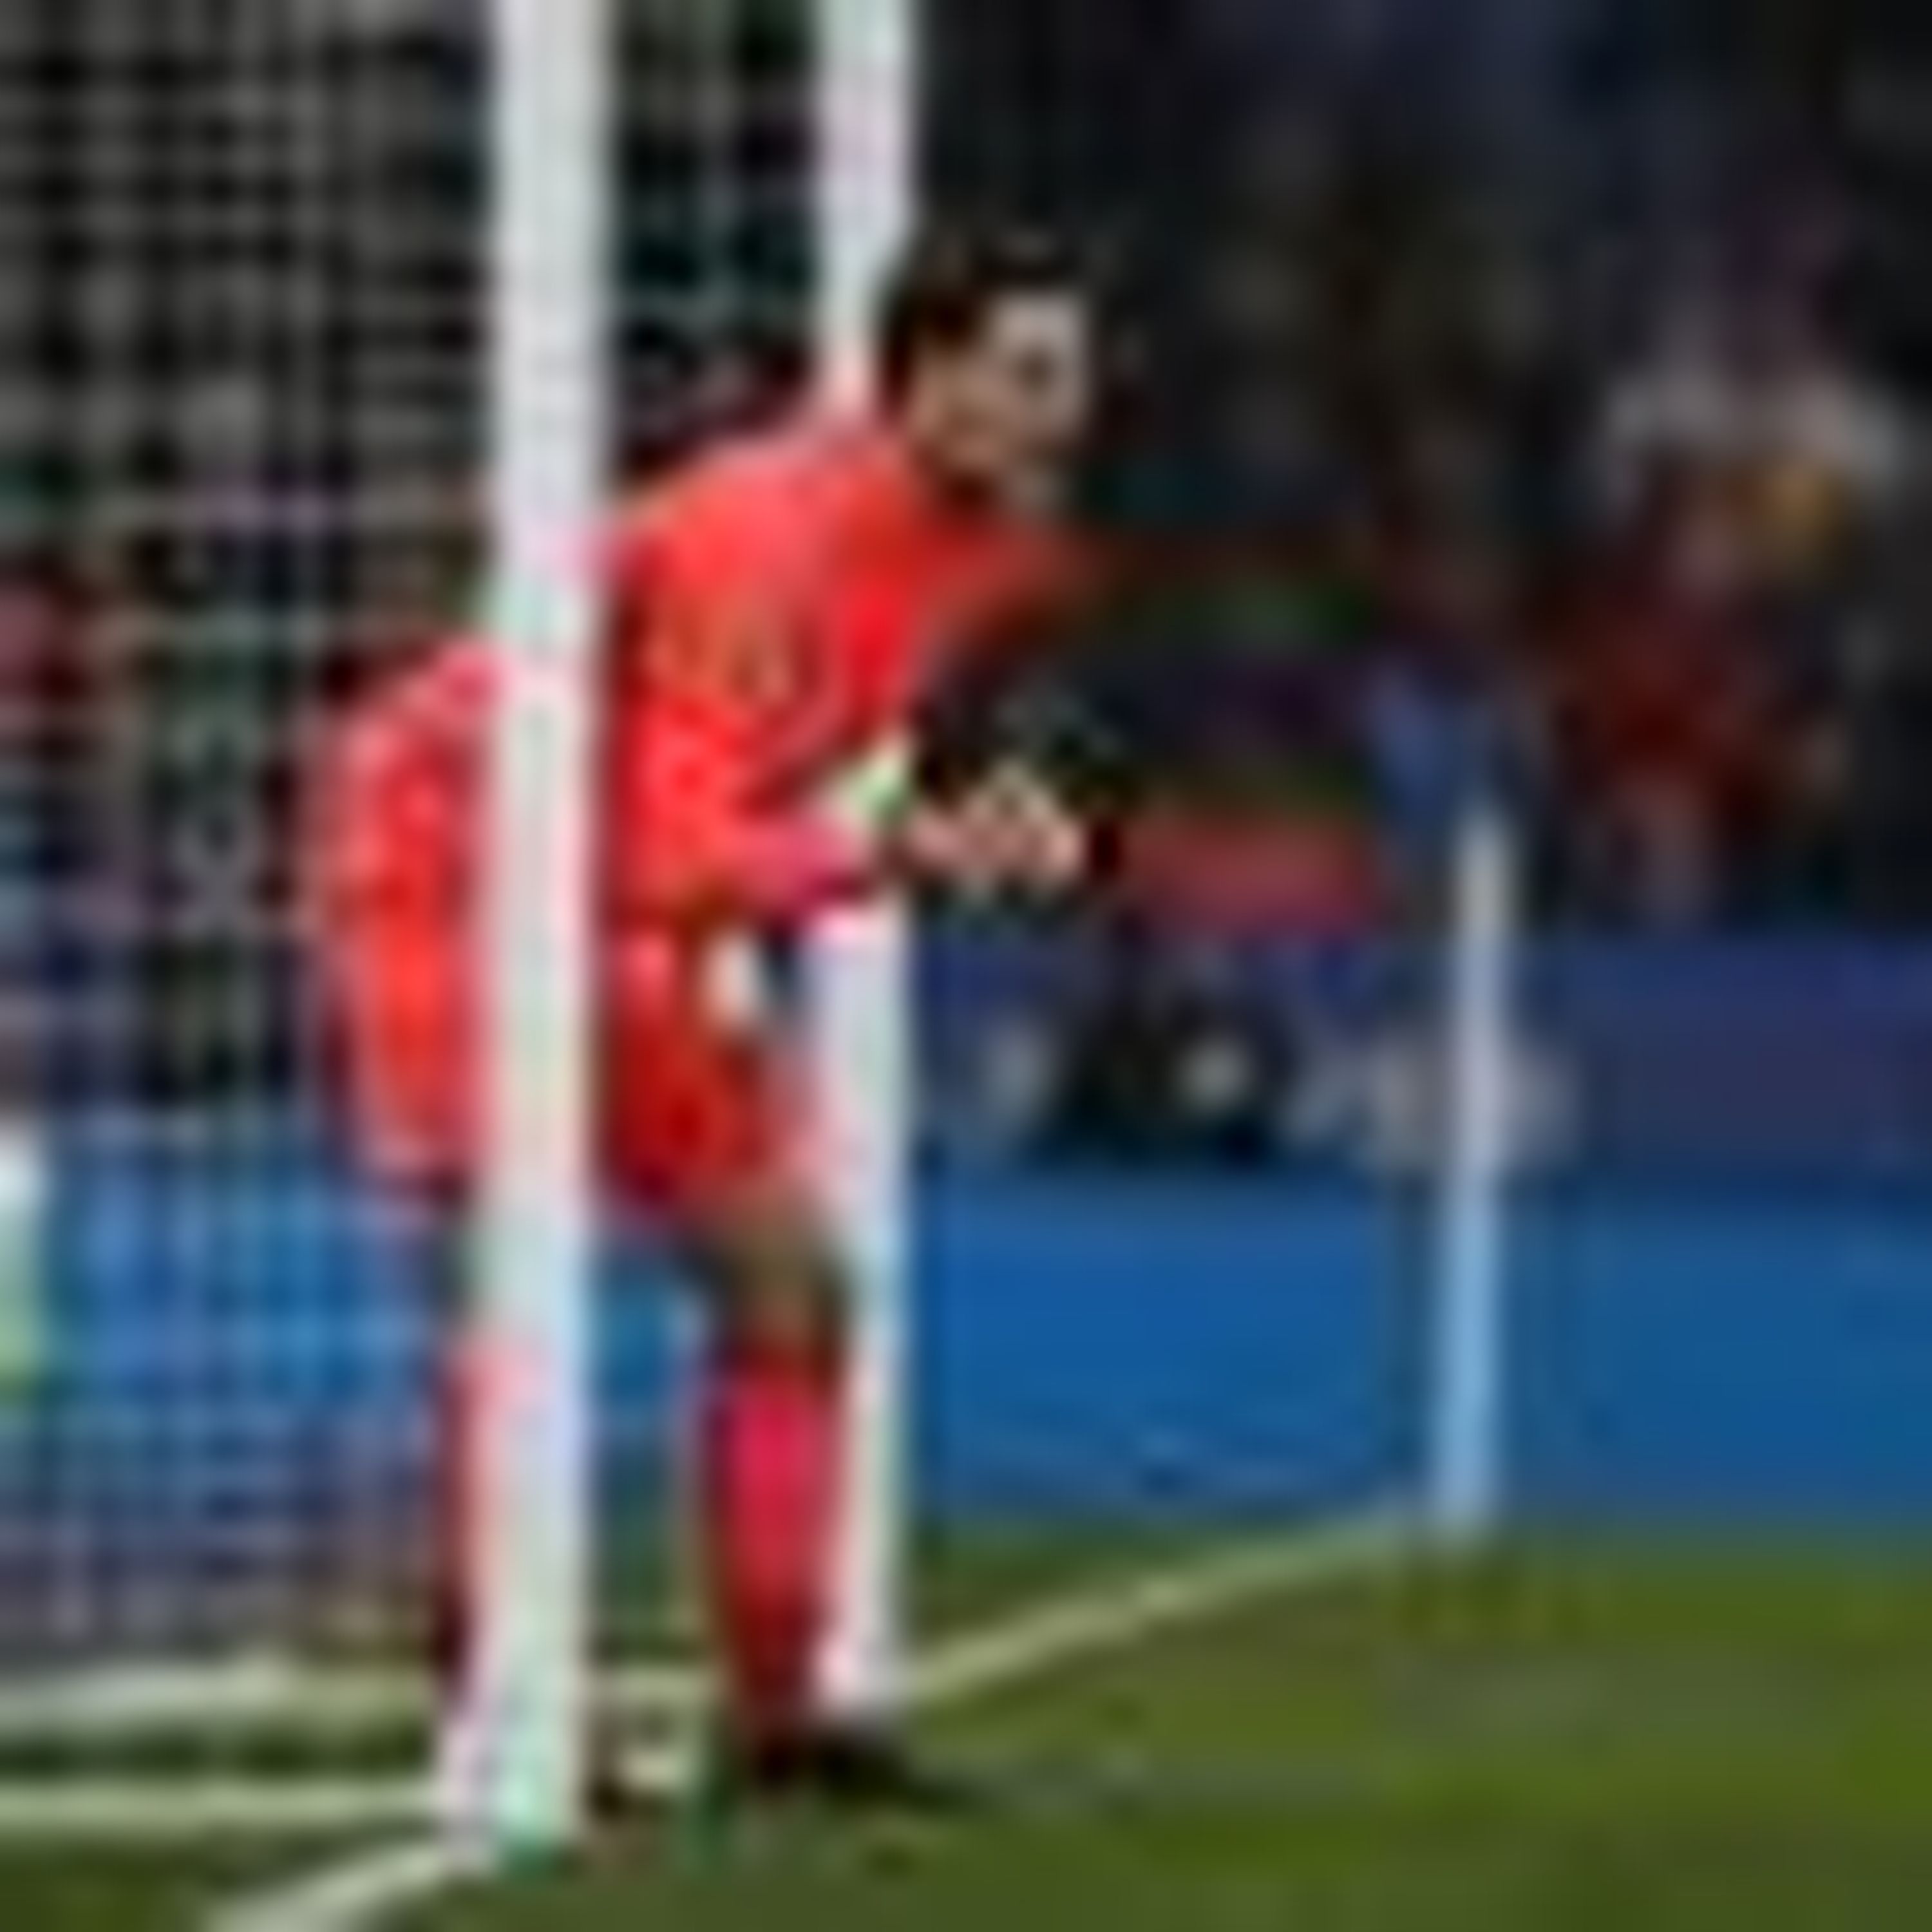 Inside Football with Guillem Balague: Goalkeeper special with Asmir Begovic and Toni-Anne Wayne